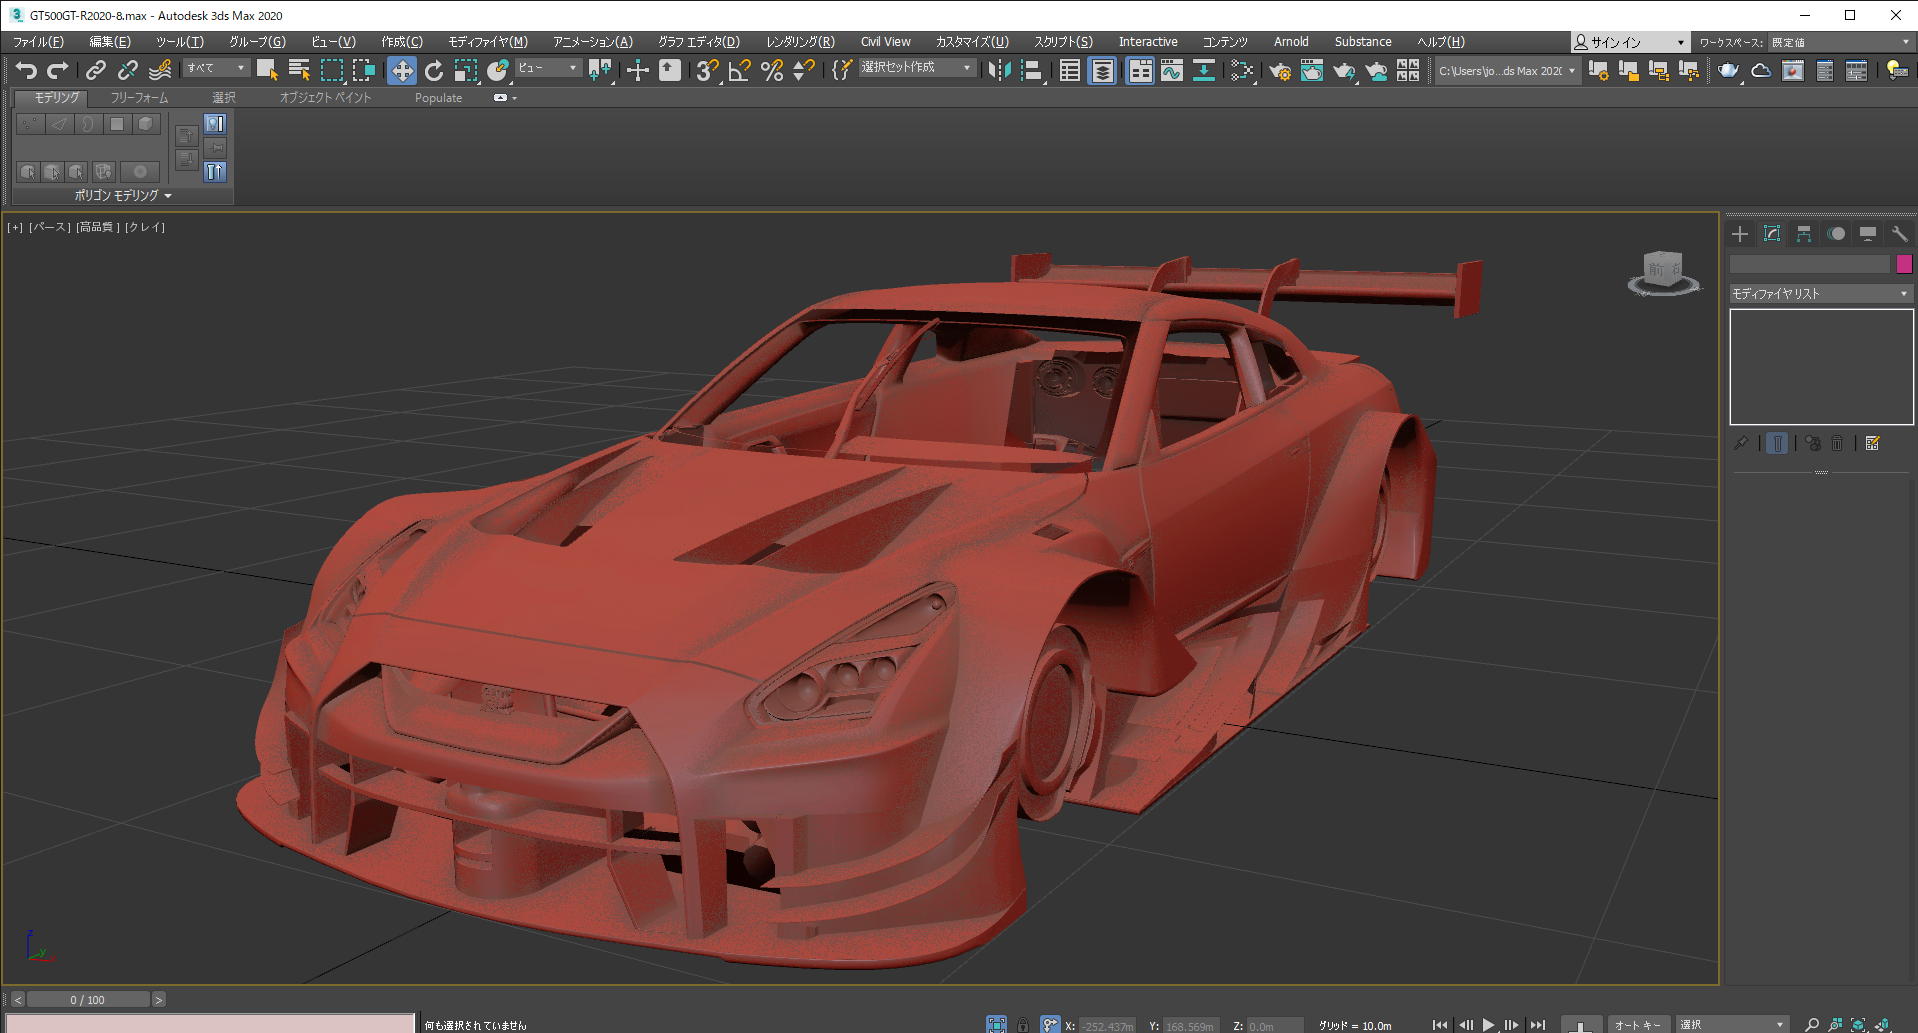 GT500GT-R2020-8.max - Autodesk 3ds Max 2020  2020_03_31 13_06_40.png